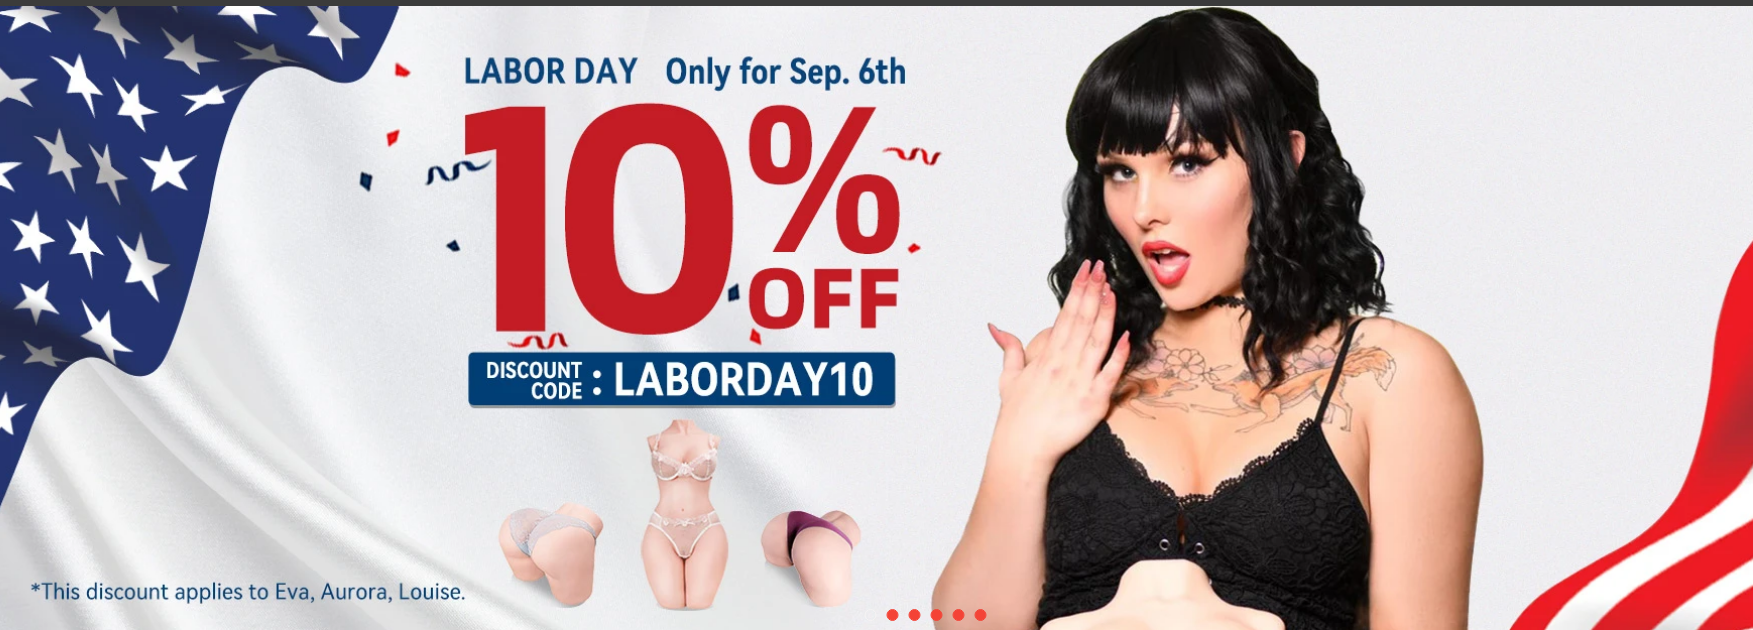 10% off tantaly labor day discount